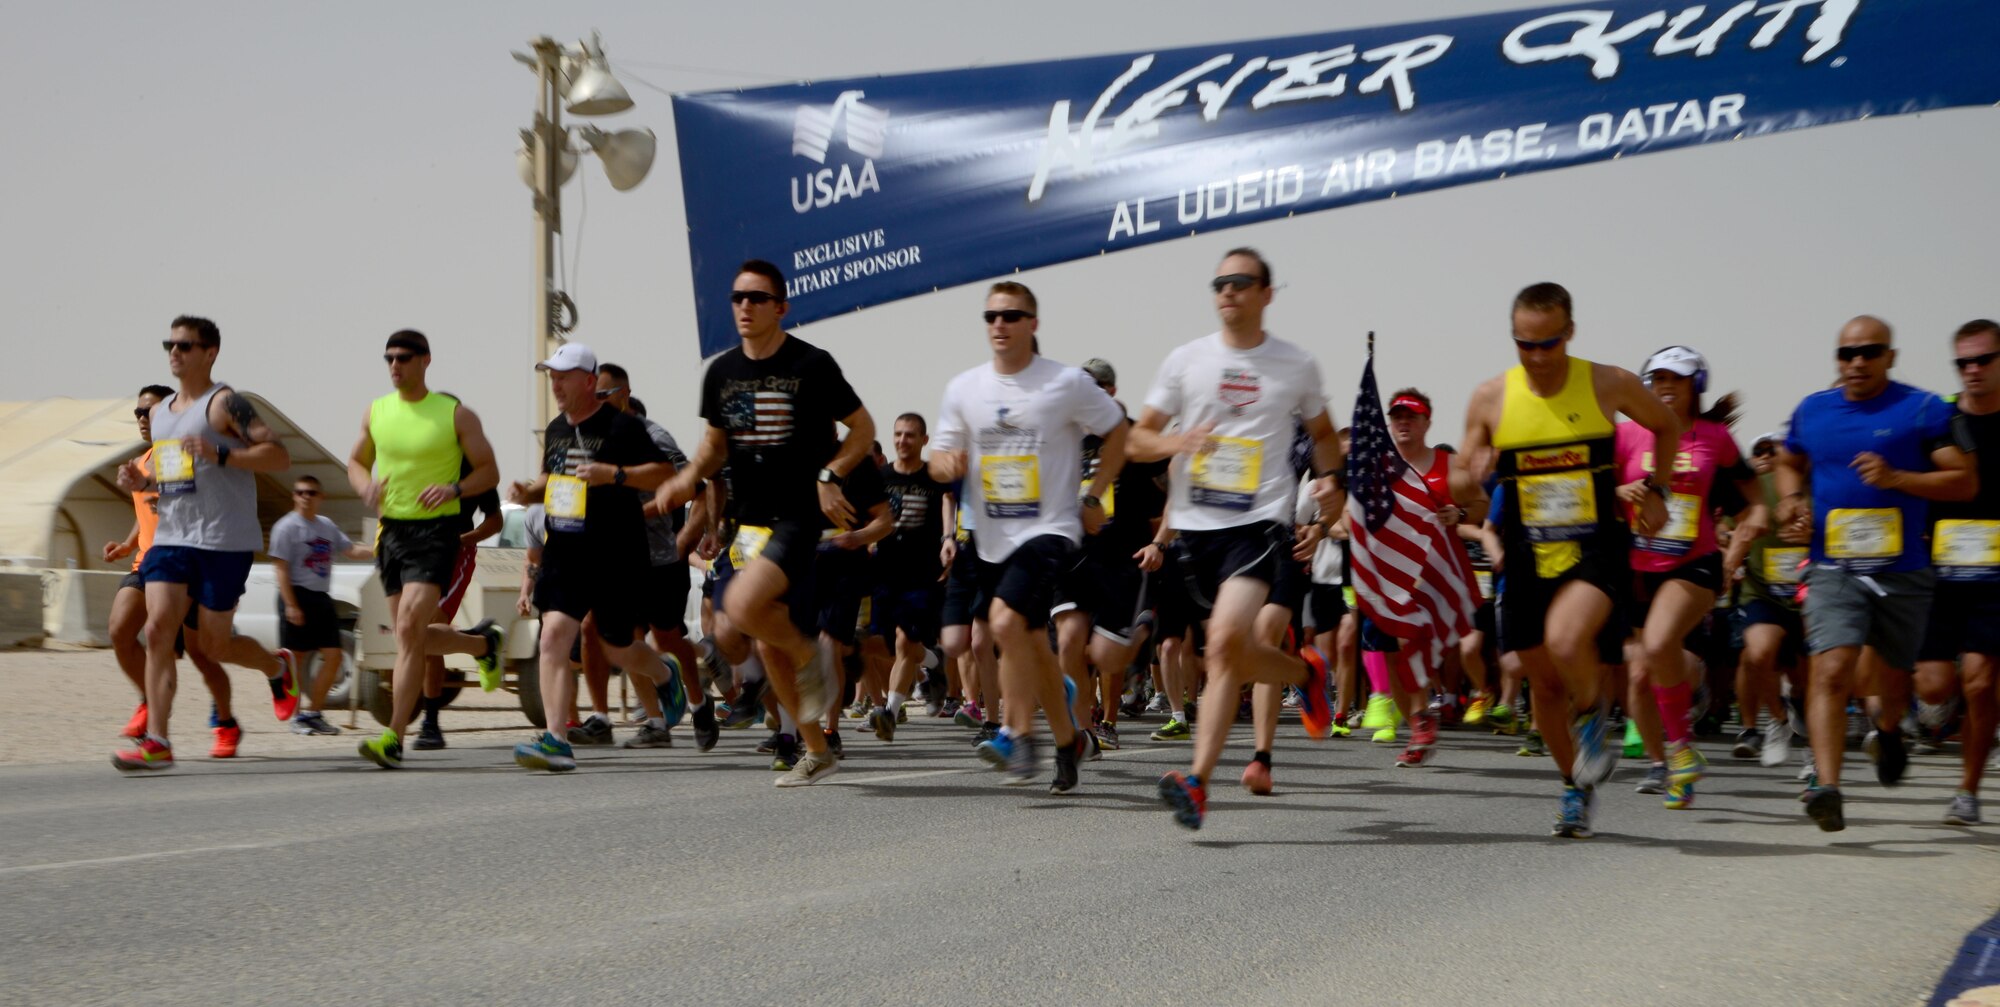 Participants of the 379th Air Expeditionary Wing’s Never Quit event begin the 5k run, April 4, 2015, at Al Udeid Air Base, Qatar. The event was coordinated by the 379th Expeditionary Force Support Squadron with informational booths provided by the 379th Expeditionary Medical Group, 379th Expeditionary Civil Engineer Squadron, and 379th AEW chapel services team. The purpose of the event was to encourage healthy and positive life choices. (U.S. Air Force photo by Senior Airman Kia Atkins)